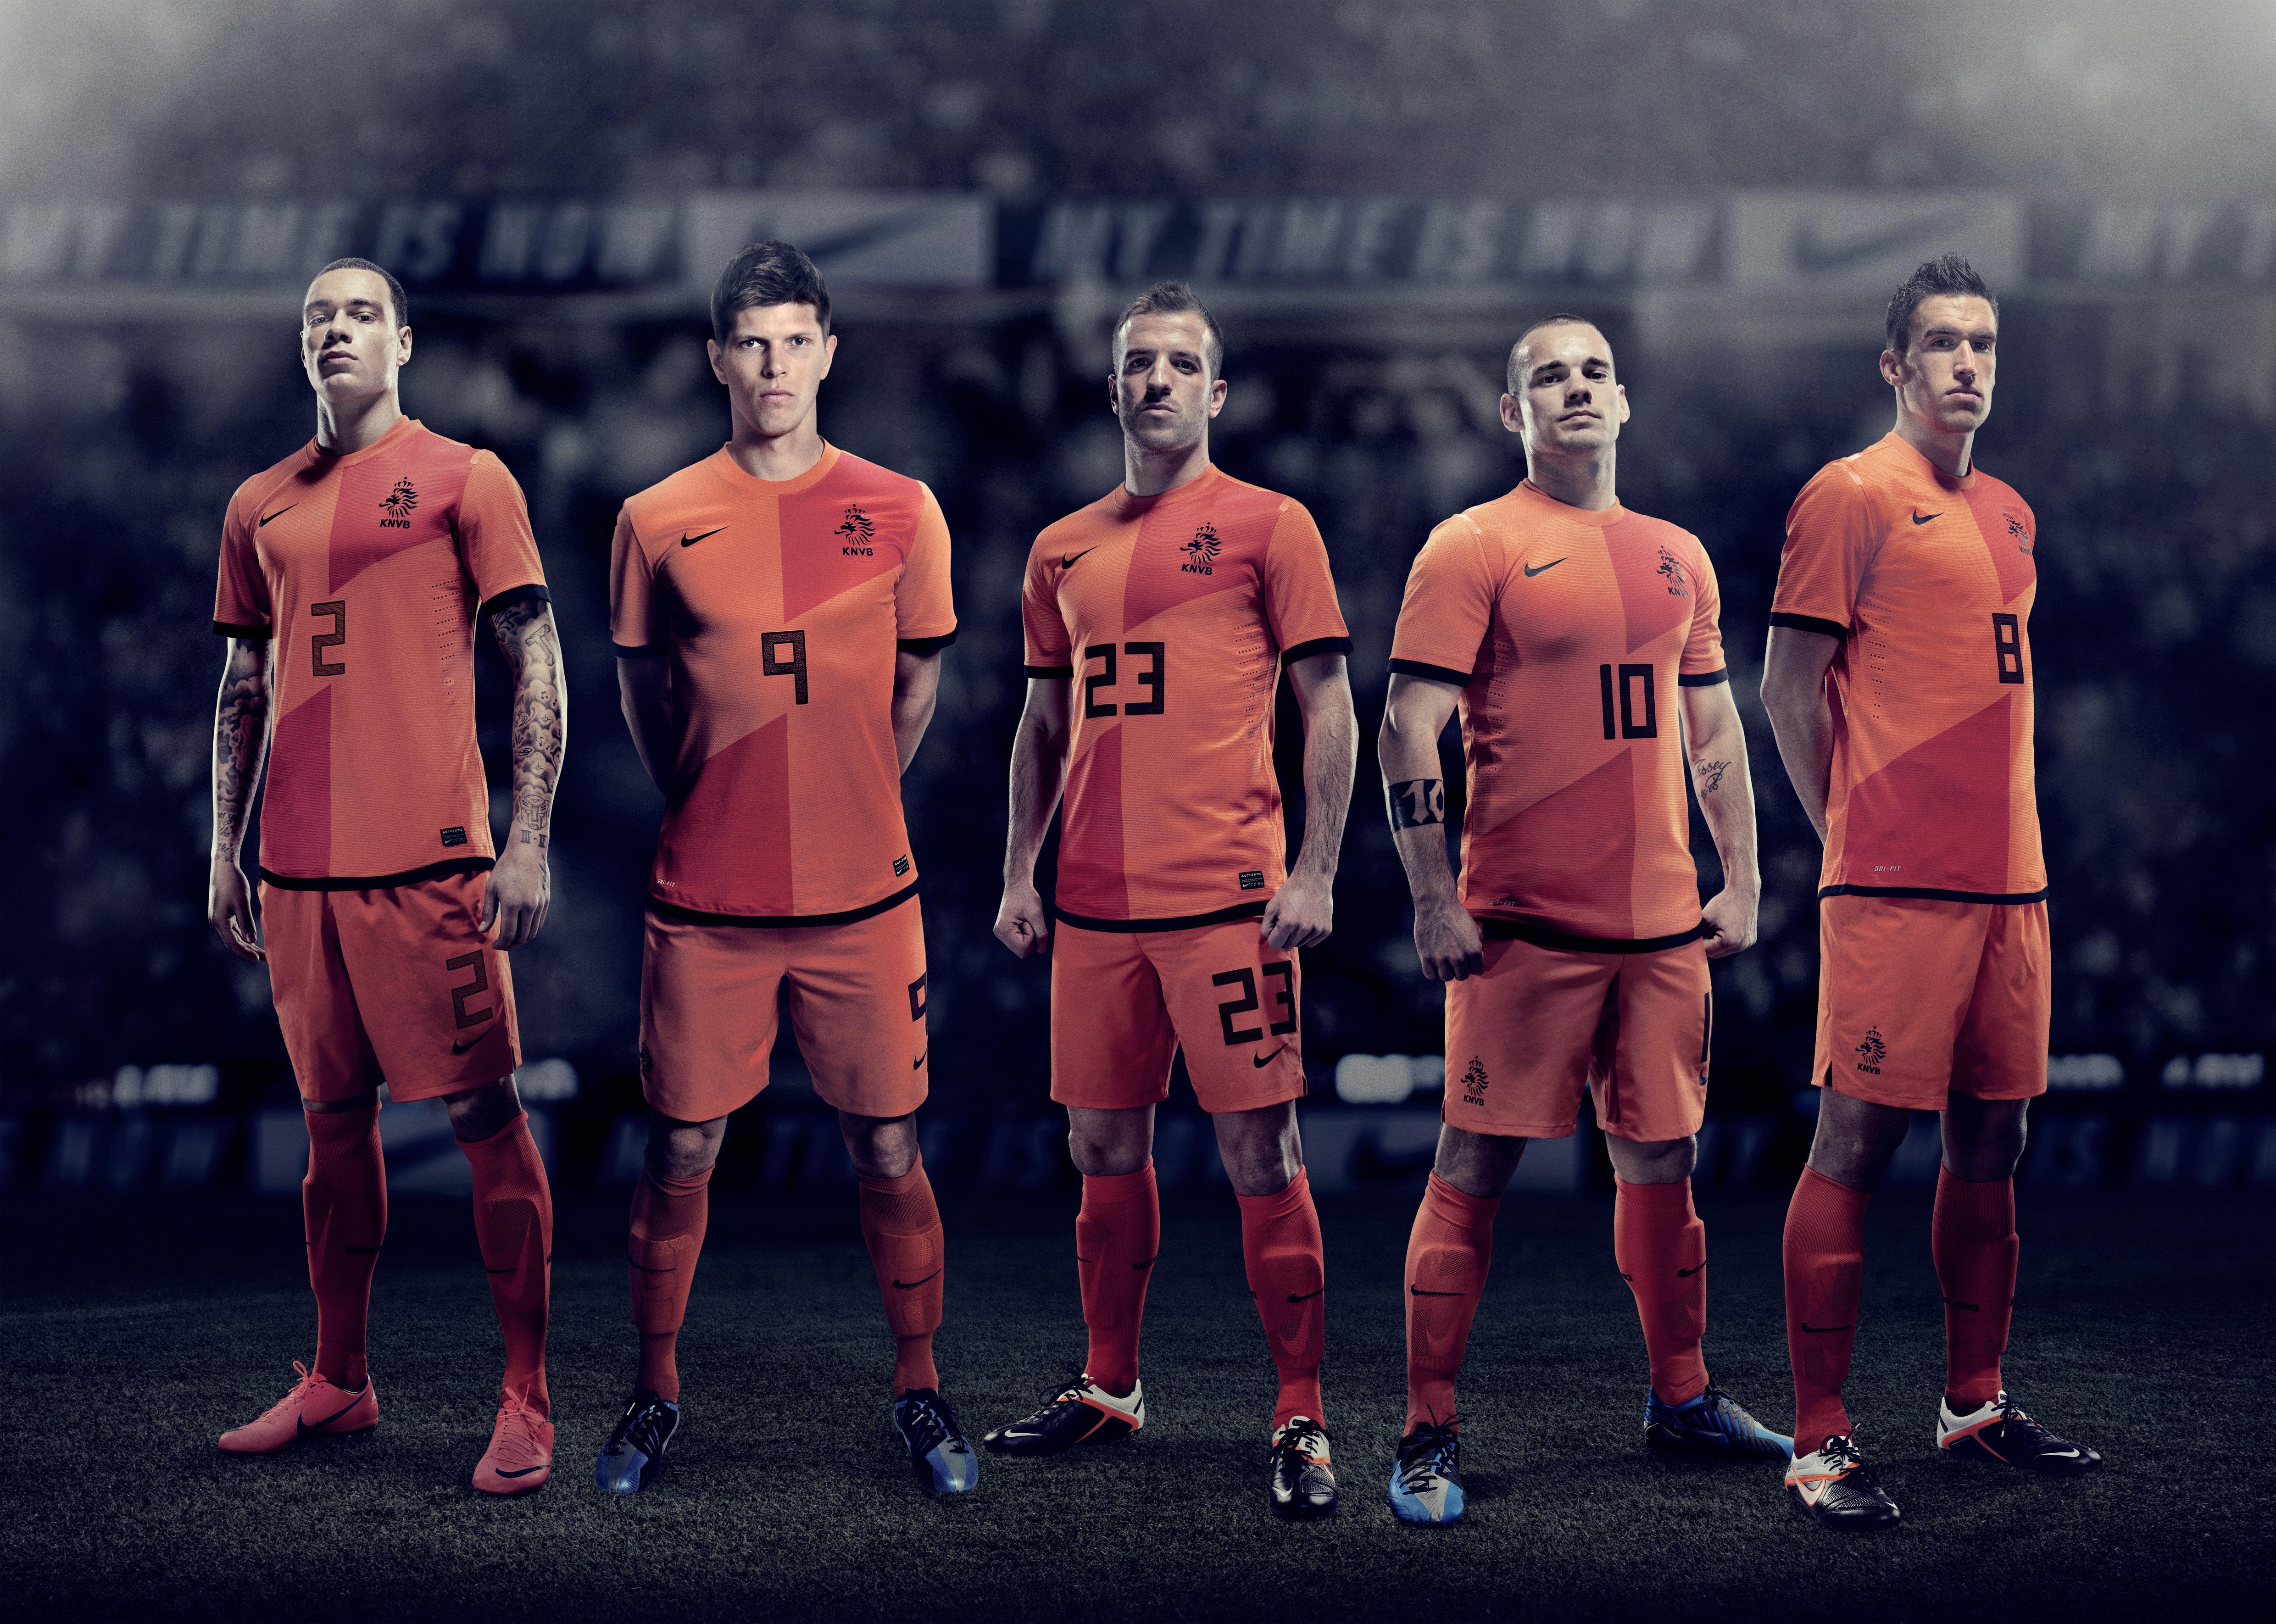 Football players of the national team of the Netherlands wallpaper